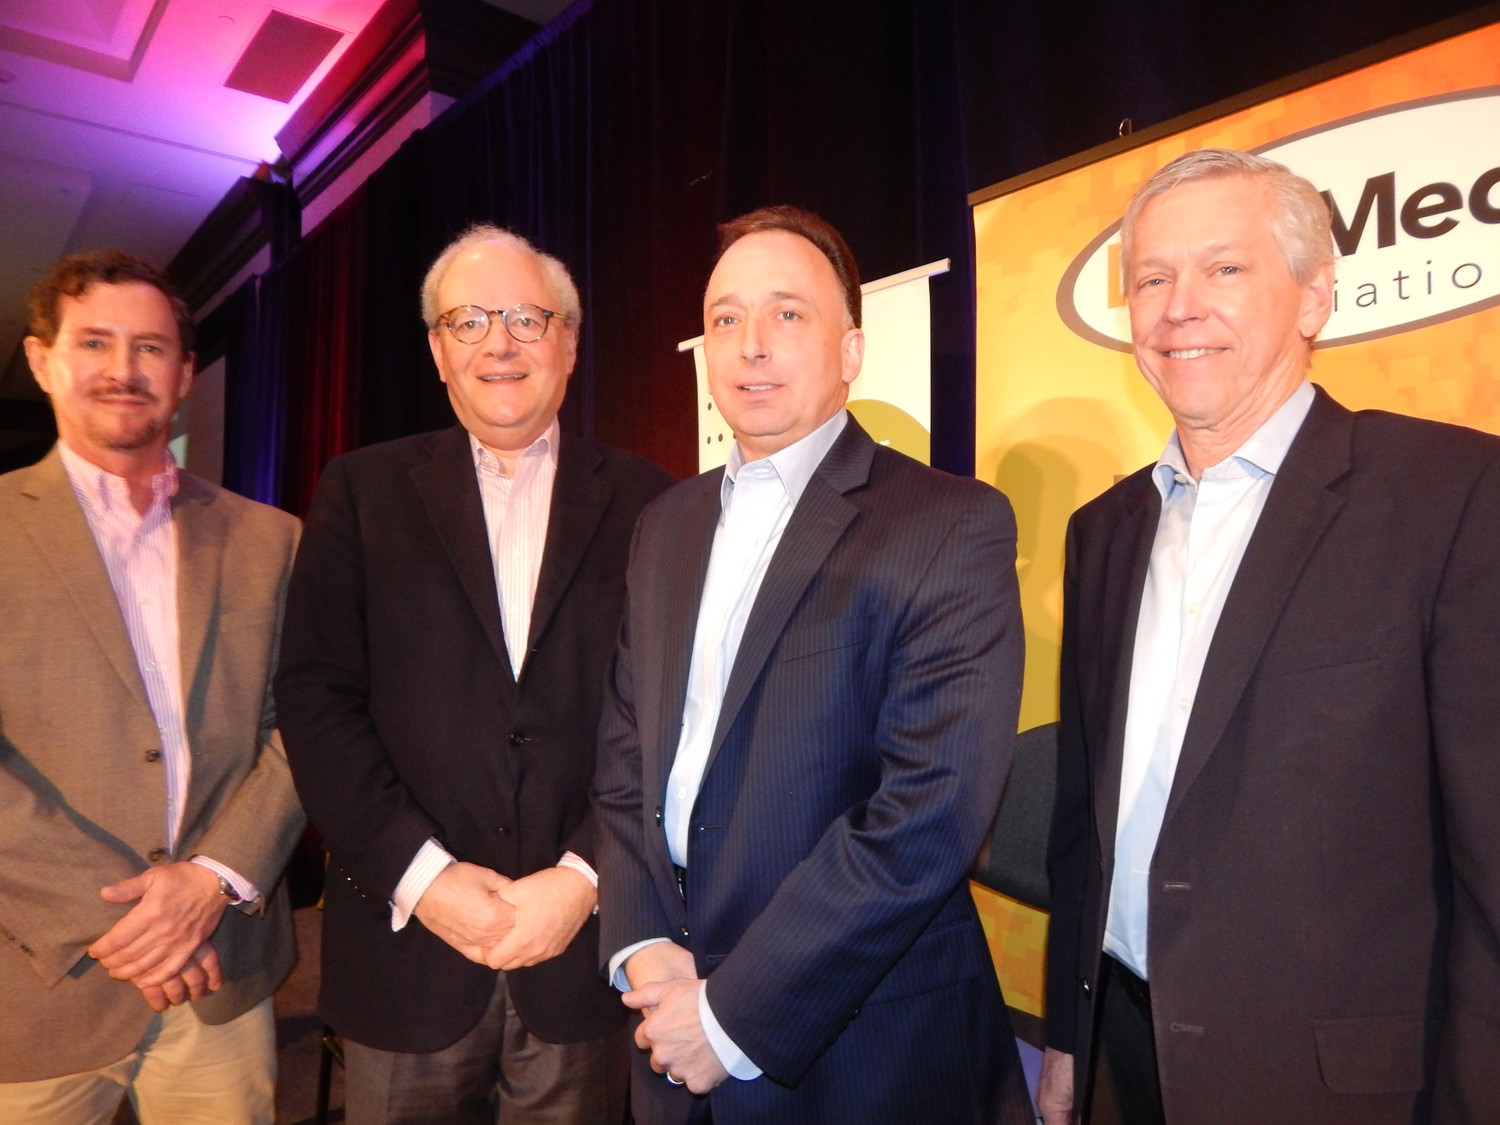 The Investing in Newspapers in 2018 panel included (from left): Mark Adams, CEO of Adams Publishing Group; Jeremy Halbreich, chairman and CEO of AIM Media Management; Mark Aldam, executive vice president and COO of Hearst; and Jim Moroney, chairman, president and CEO, A.H. Belo Corp.